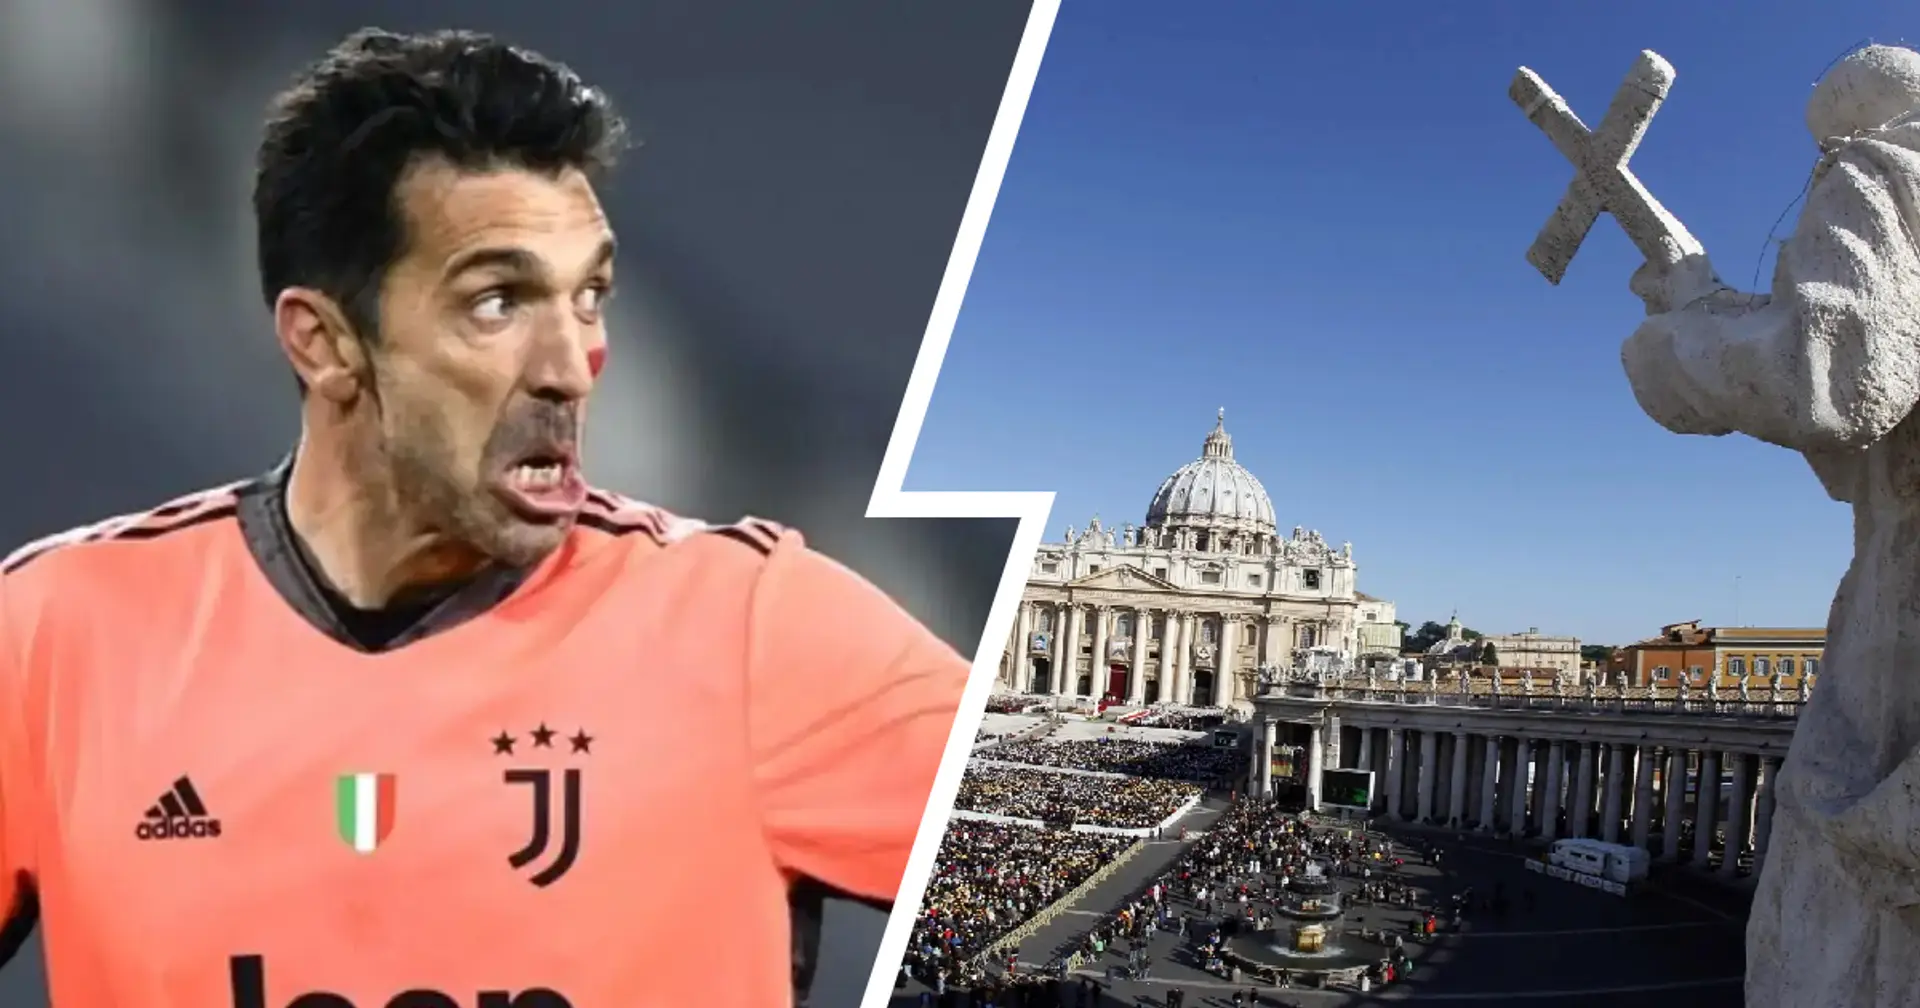 Buffon could be suspended for blasphemy, second time he's caught doing it